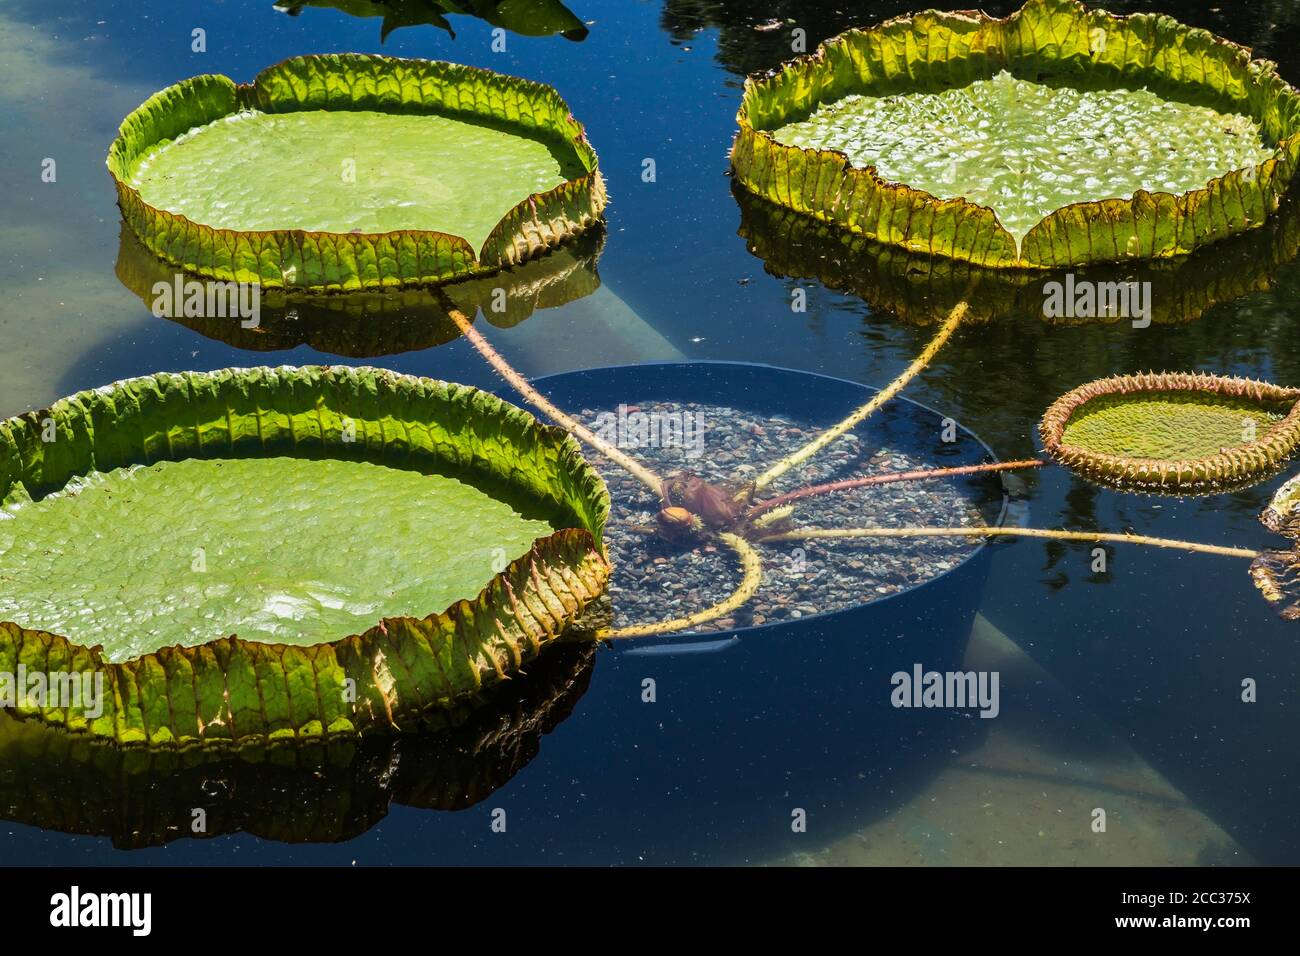 Victoria amazonica - Giant Water Lily plants growing in black plastic container submerged on the bottom of a man-made concrete pond. Stock Photo